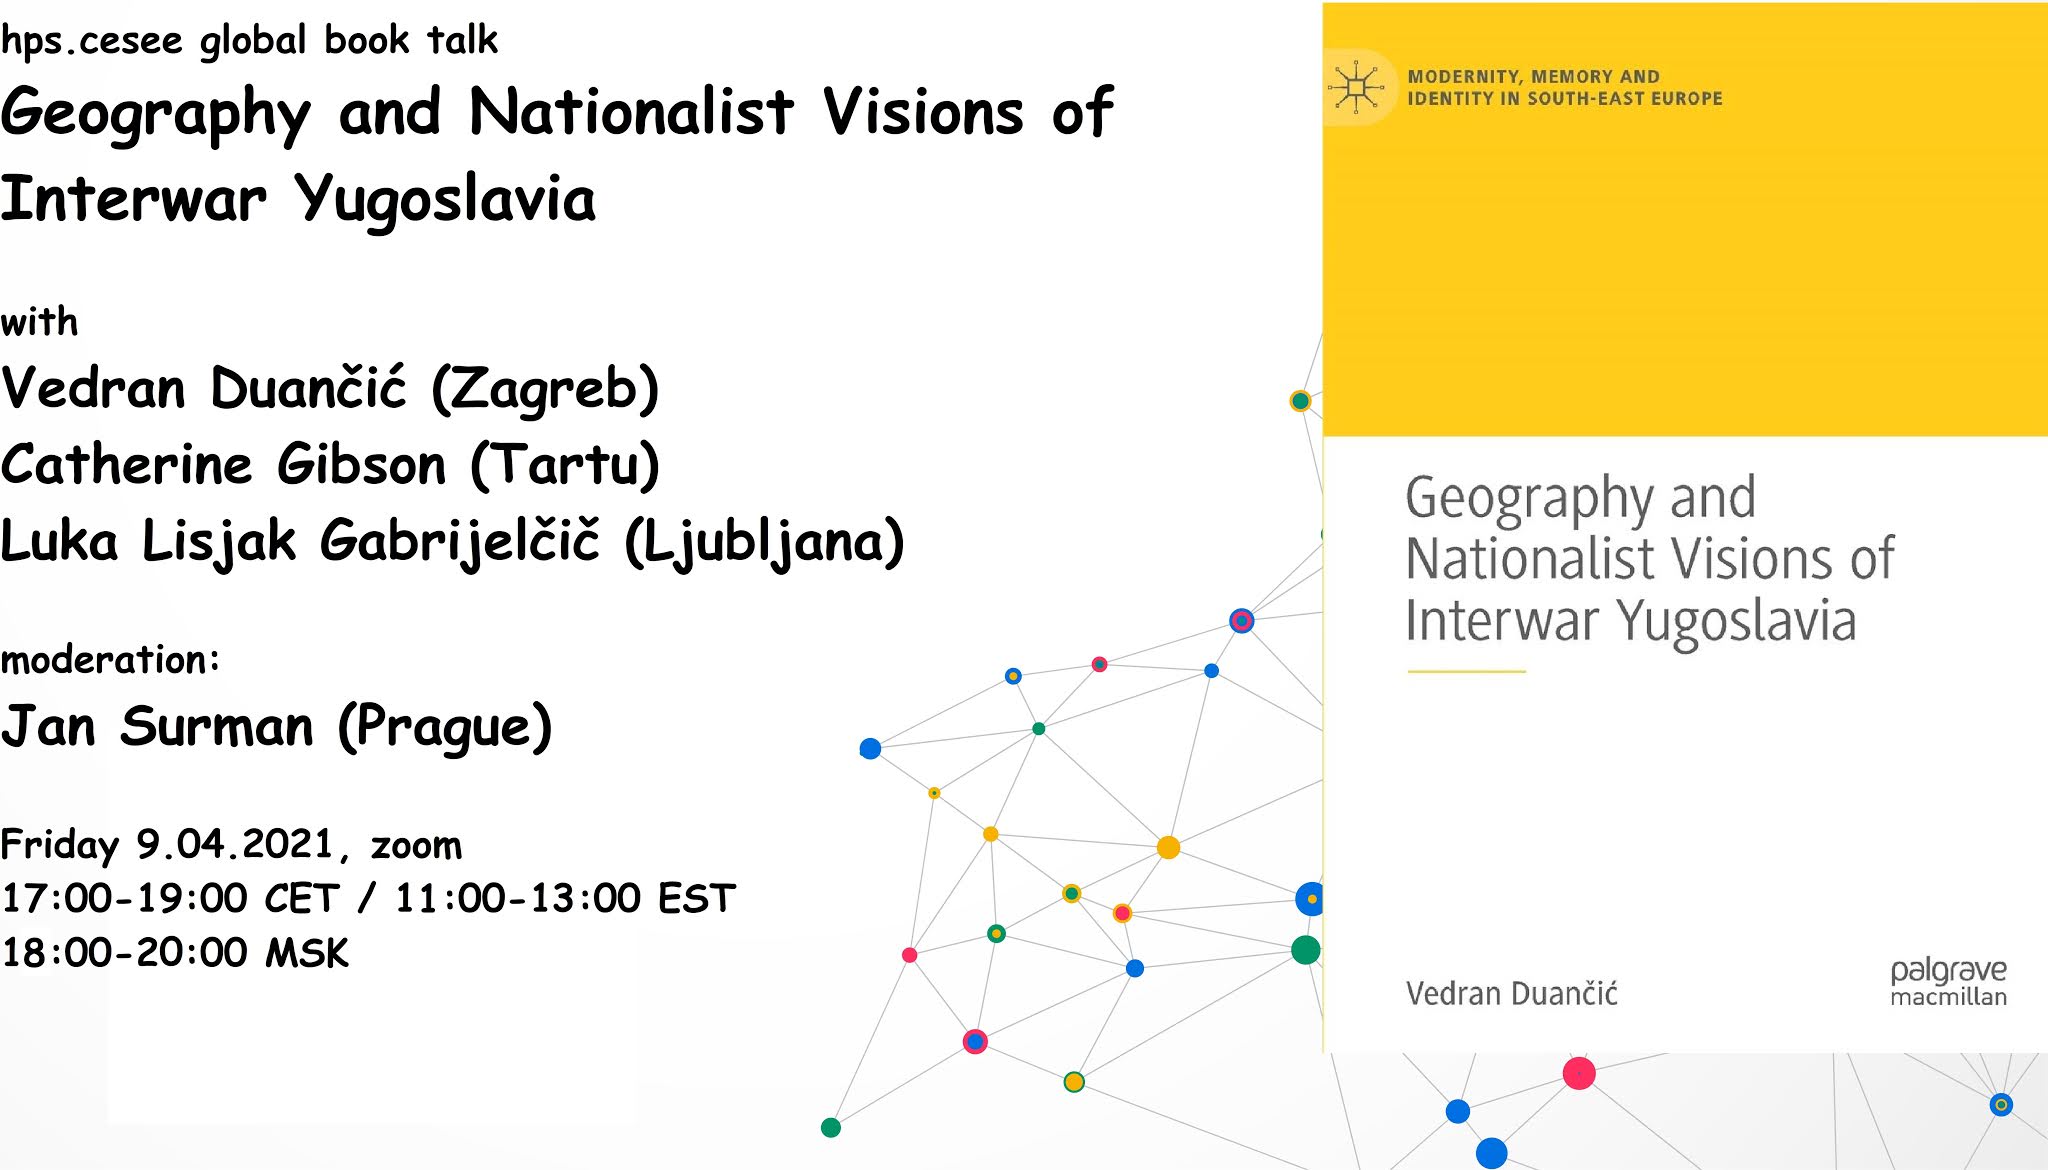 History of Science in Central, Eastern and Southeastern Europe: hps.cesee book talk: Catherine Gabrijelčič & Vedran Duančić on Geography and Nationalist Visions of Interwar April 9, 17:00-19:00 Central European